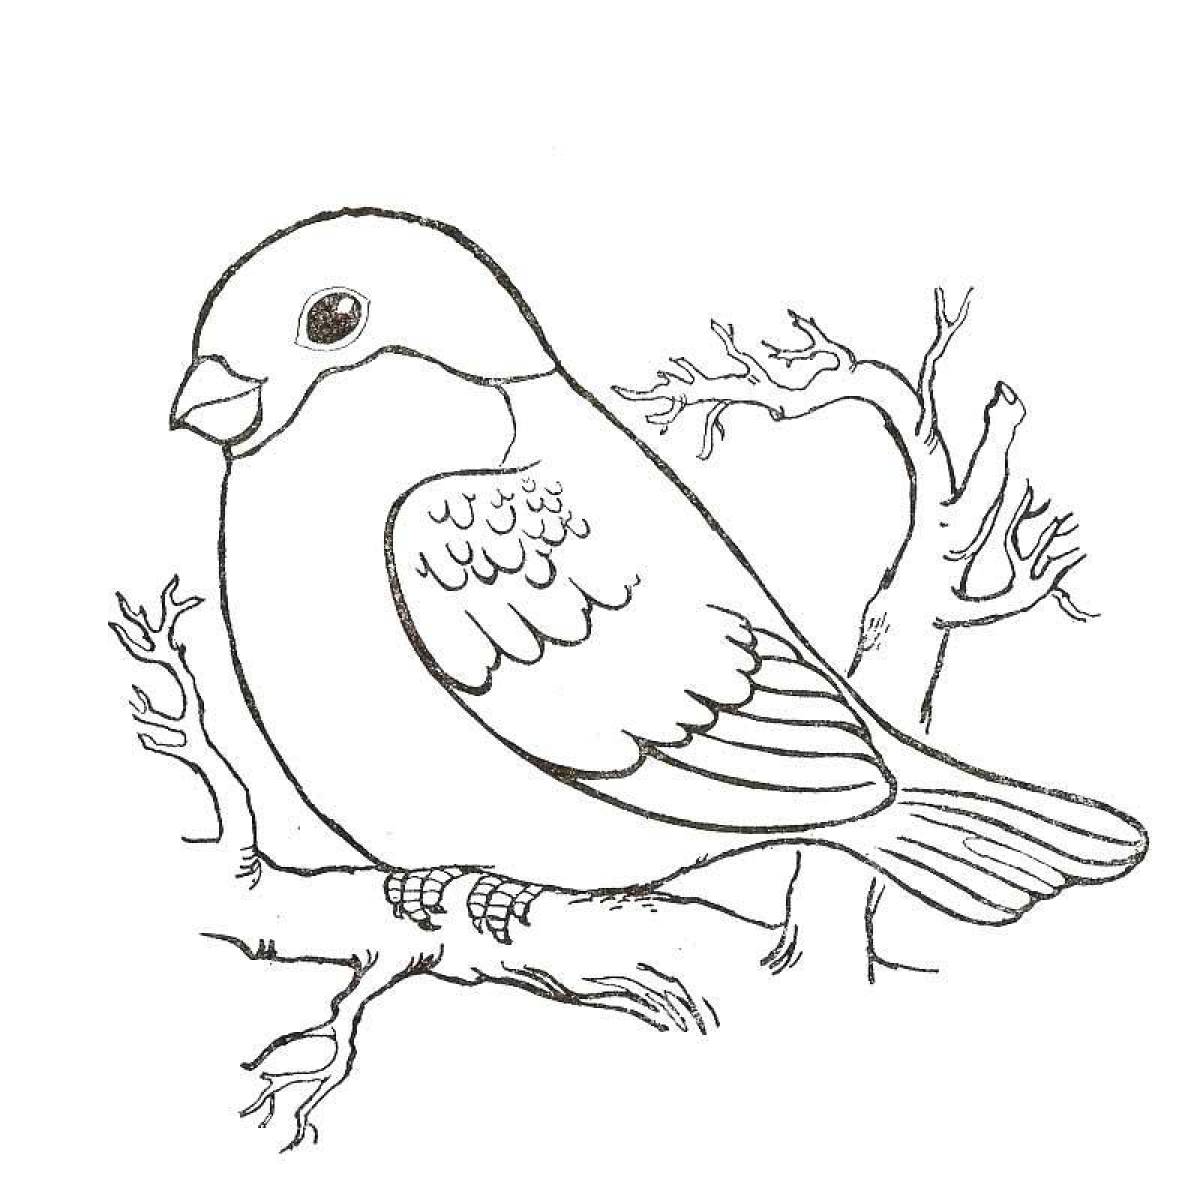 Outstanding wintering birds coloring page for 3-4 year olds